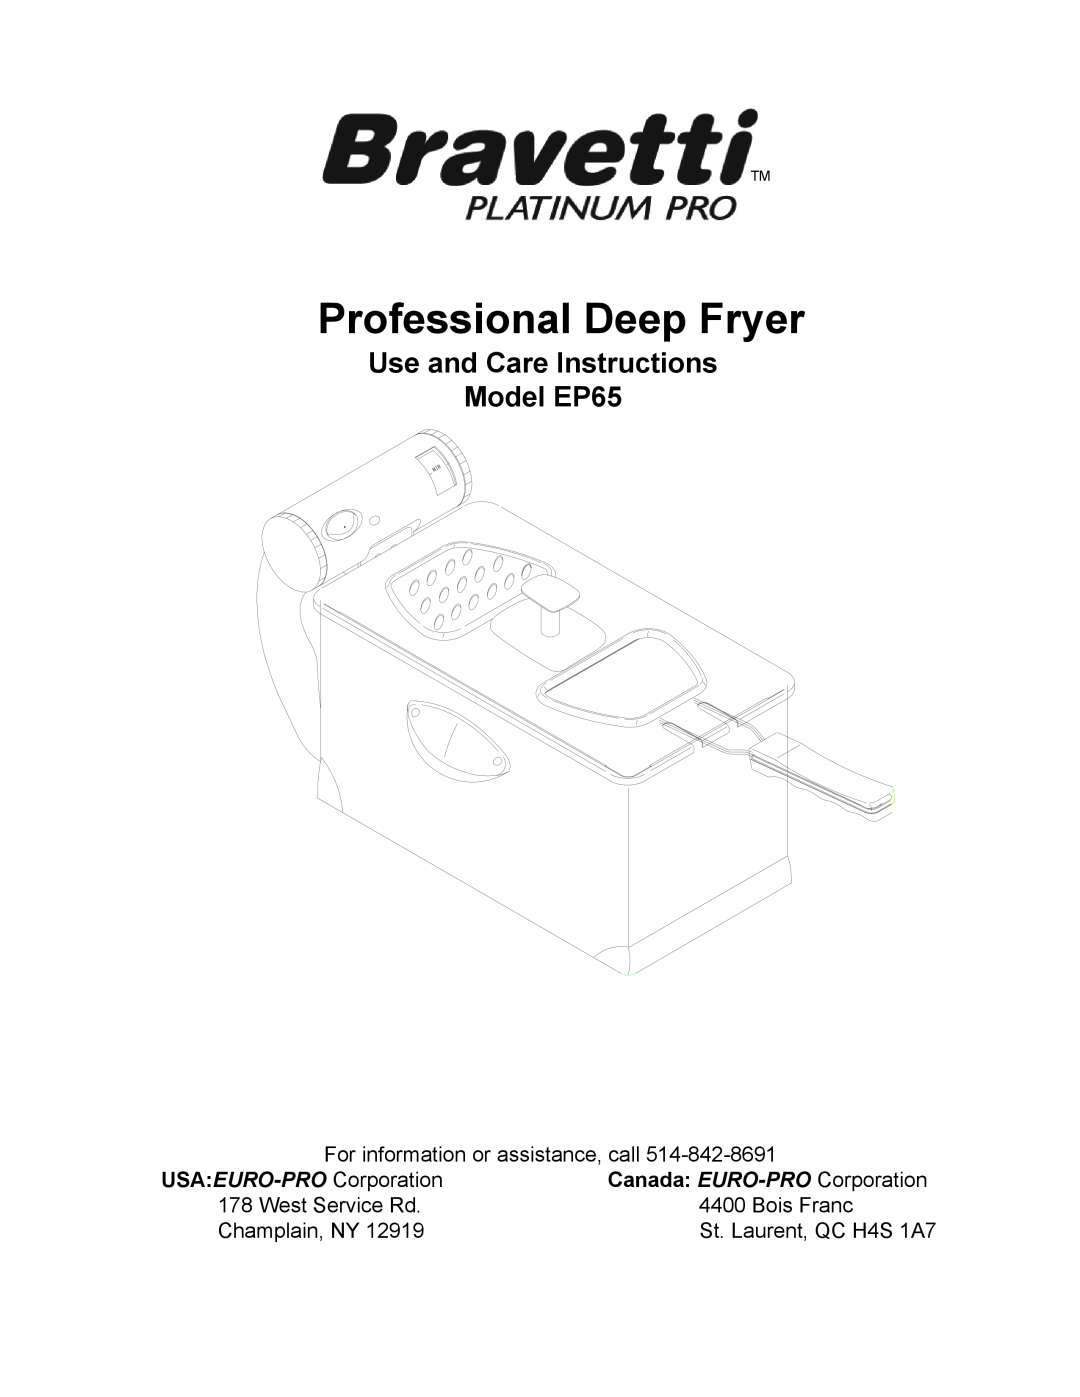 Bravetti manual Use and Care Instructions Model EP65, Professional Deep Fryer 